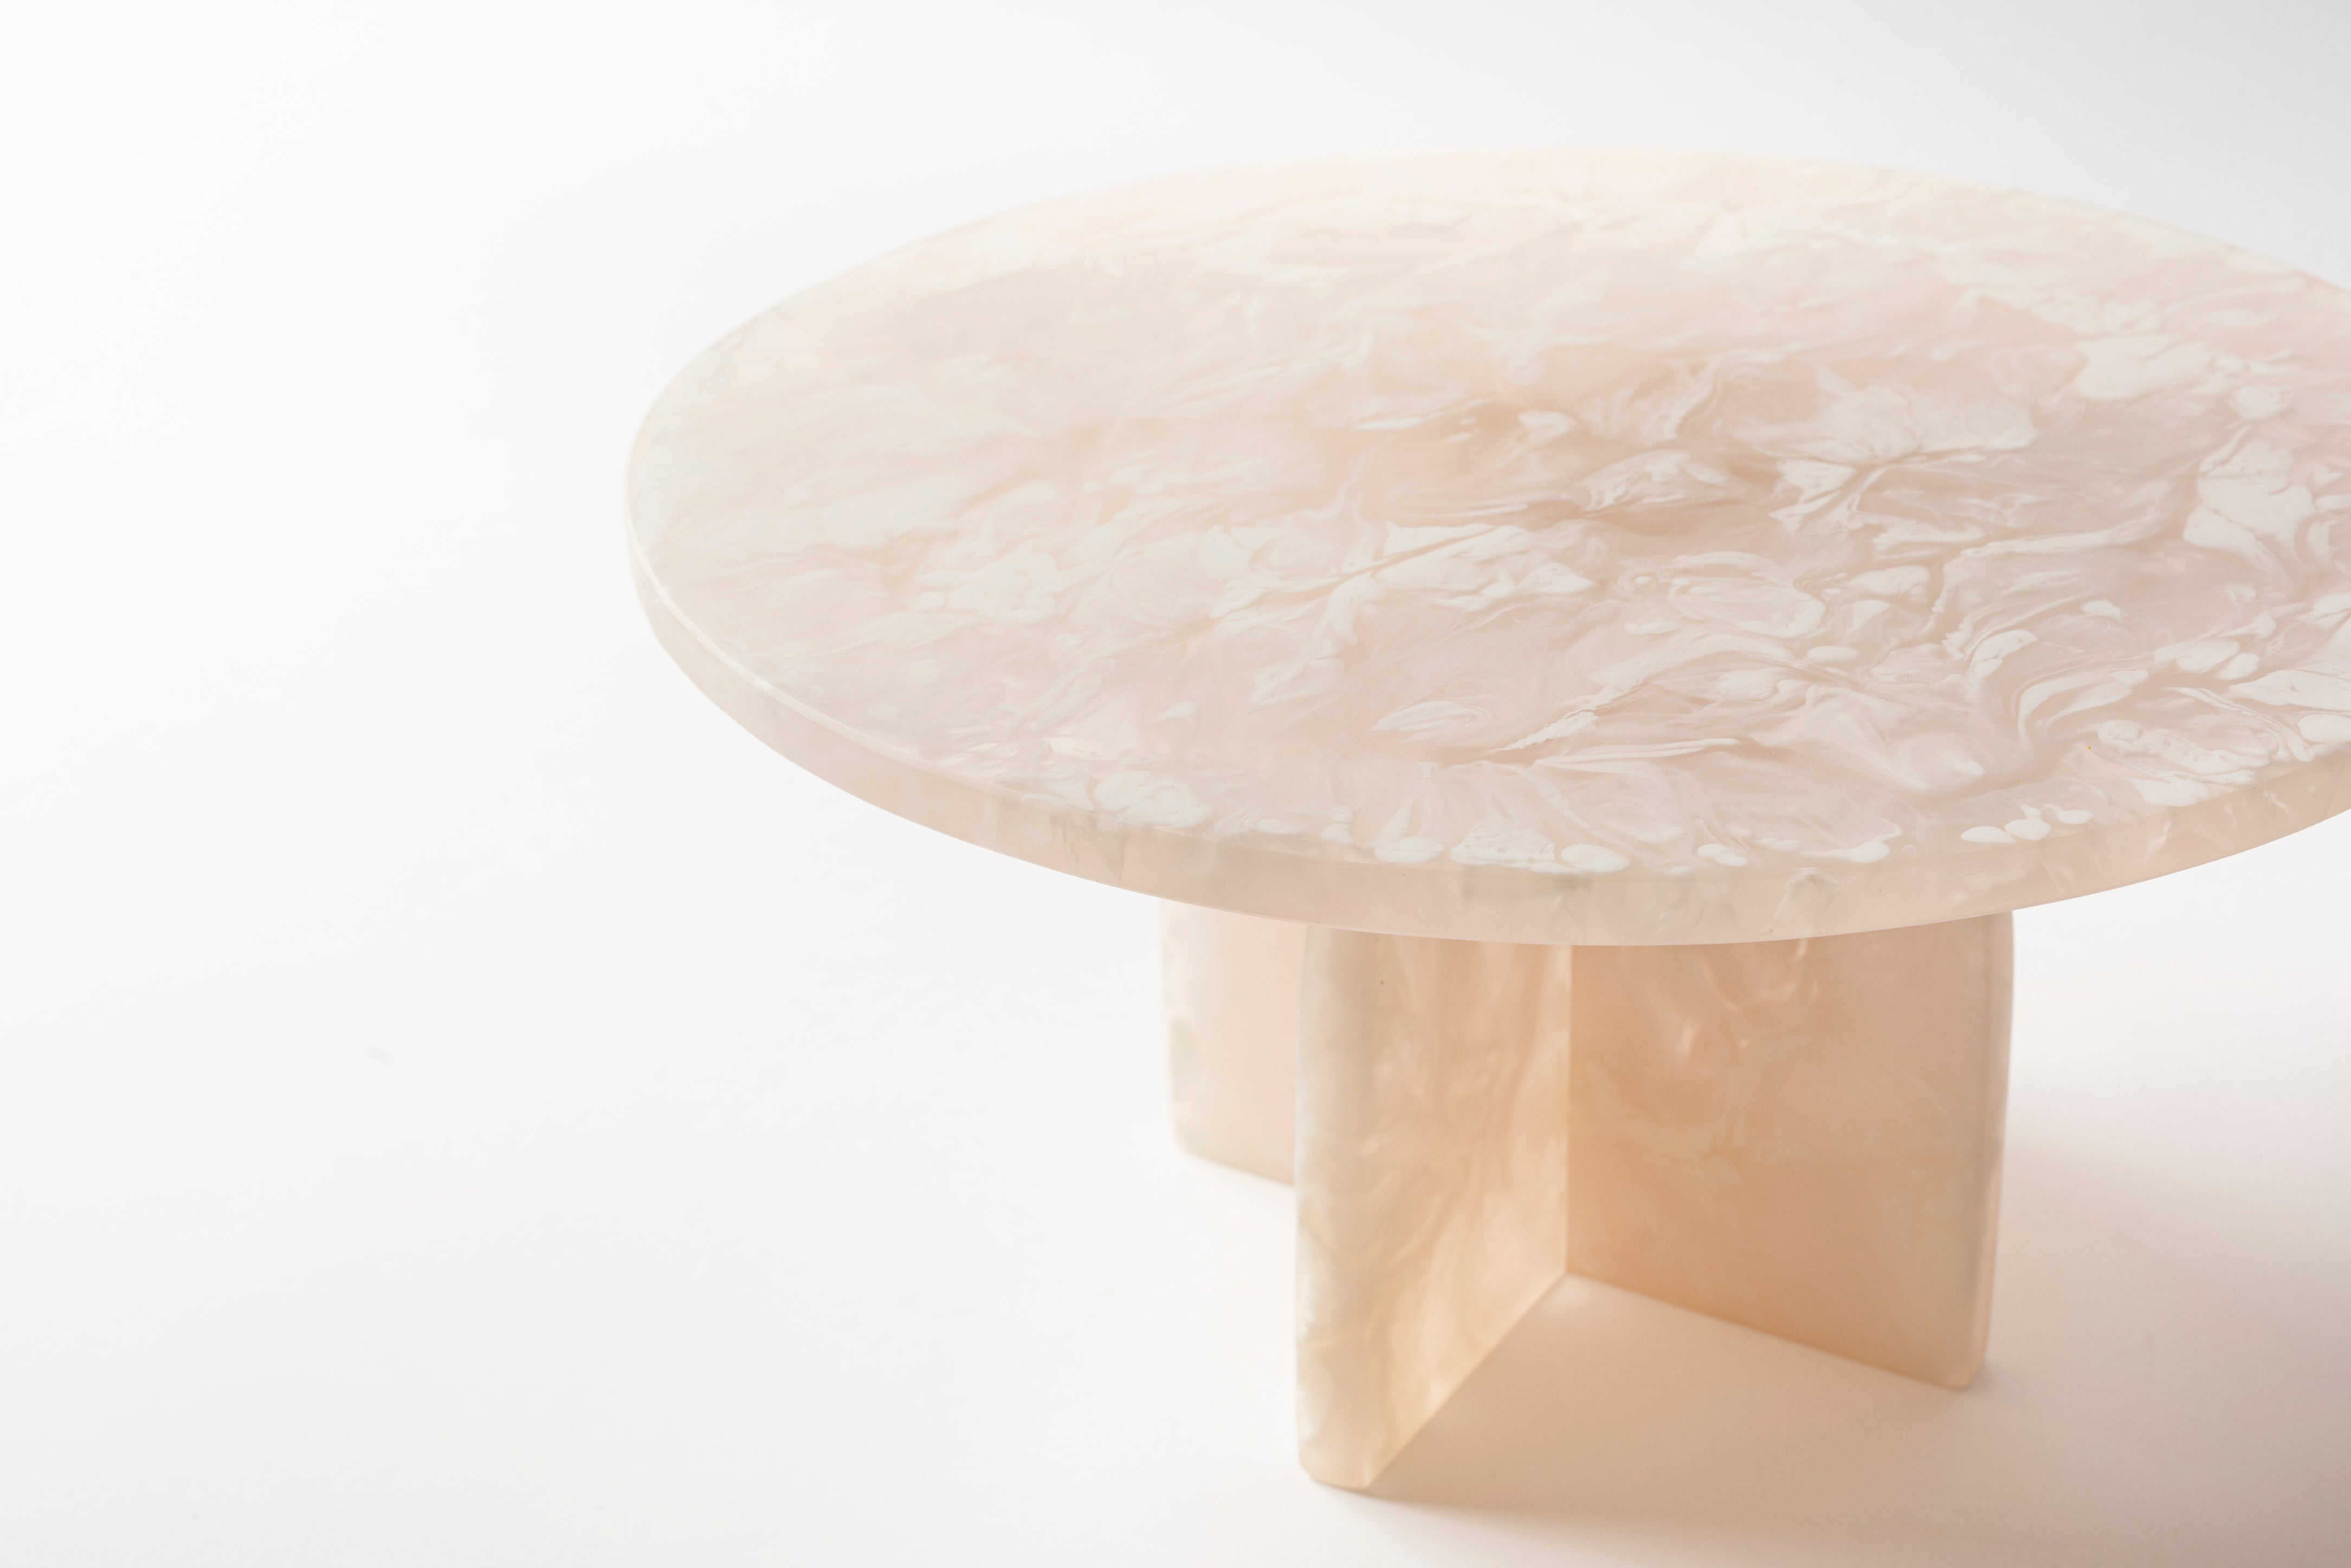 Flow Resin Cake Stand with Marble finish for hire | For Love & Living Gold Coast Weddings & Events